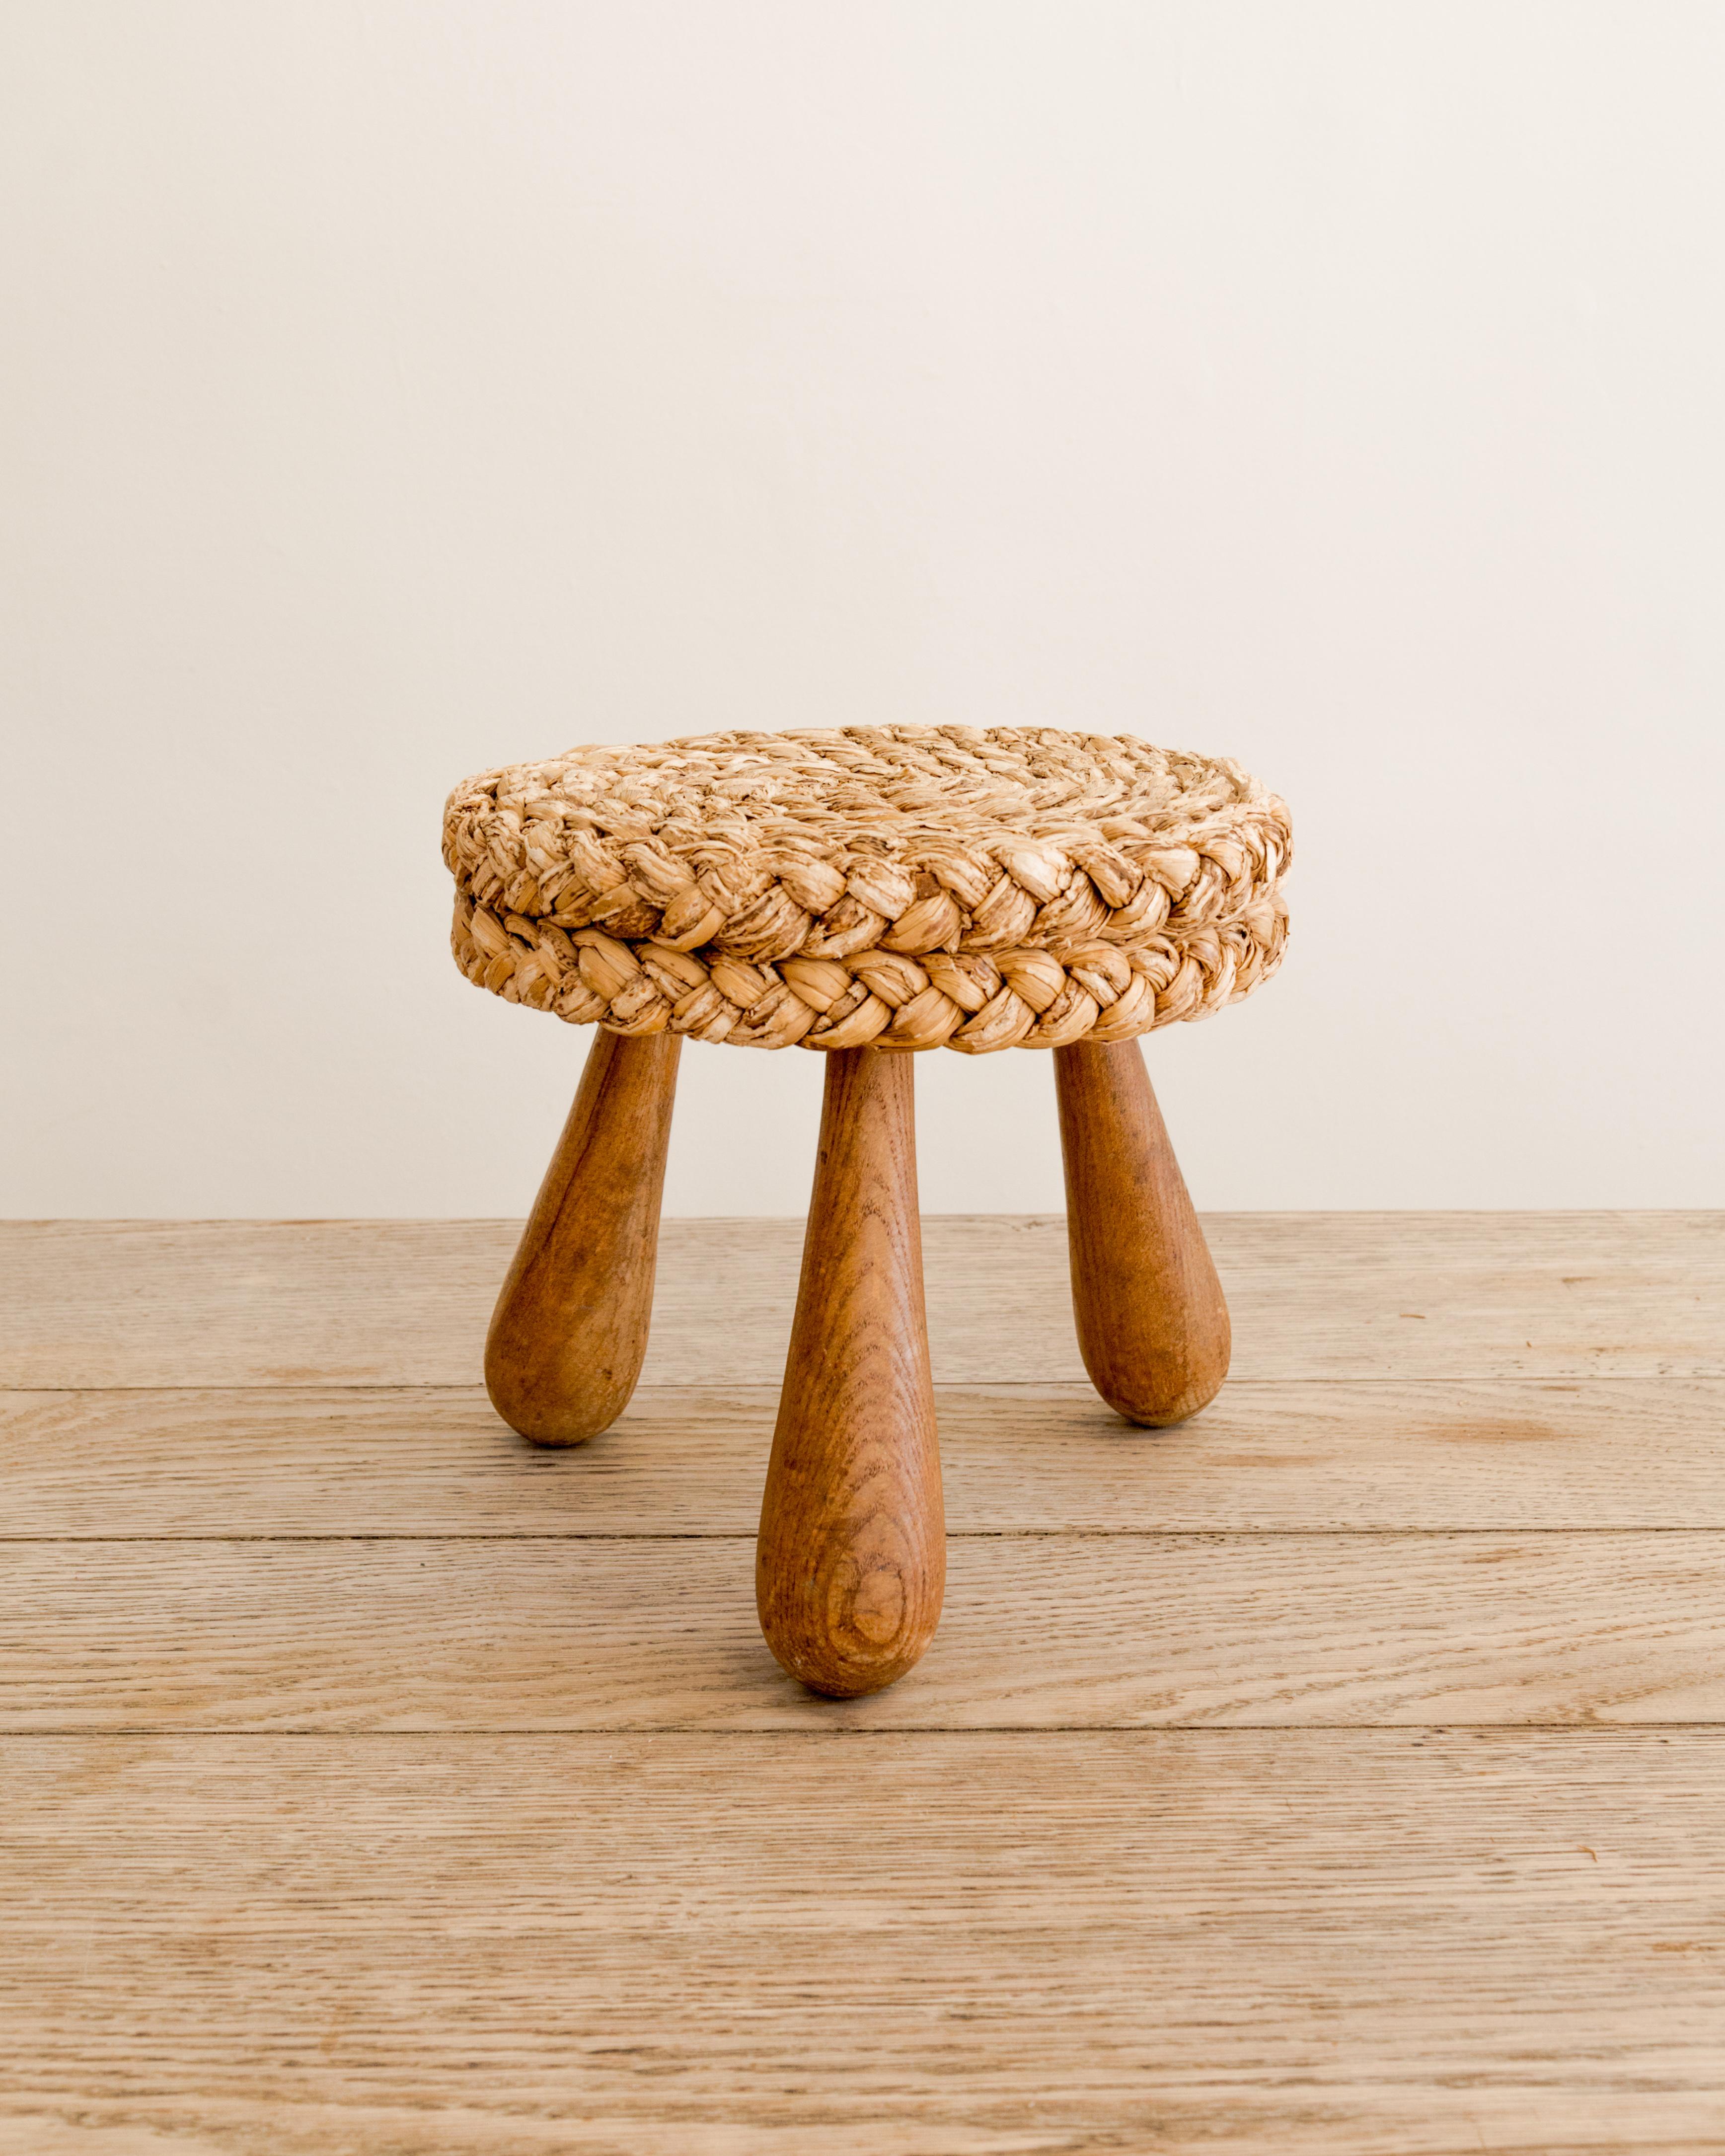 Three-legged, braided rush seat tabouret by Audoux-Minet, France circa 1950's.